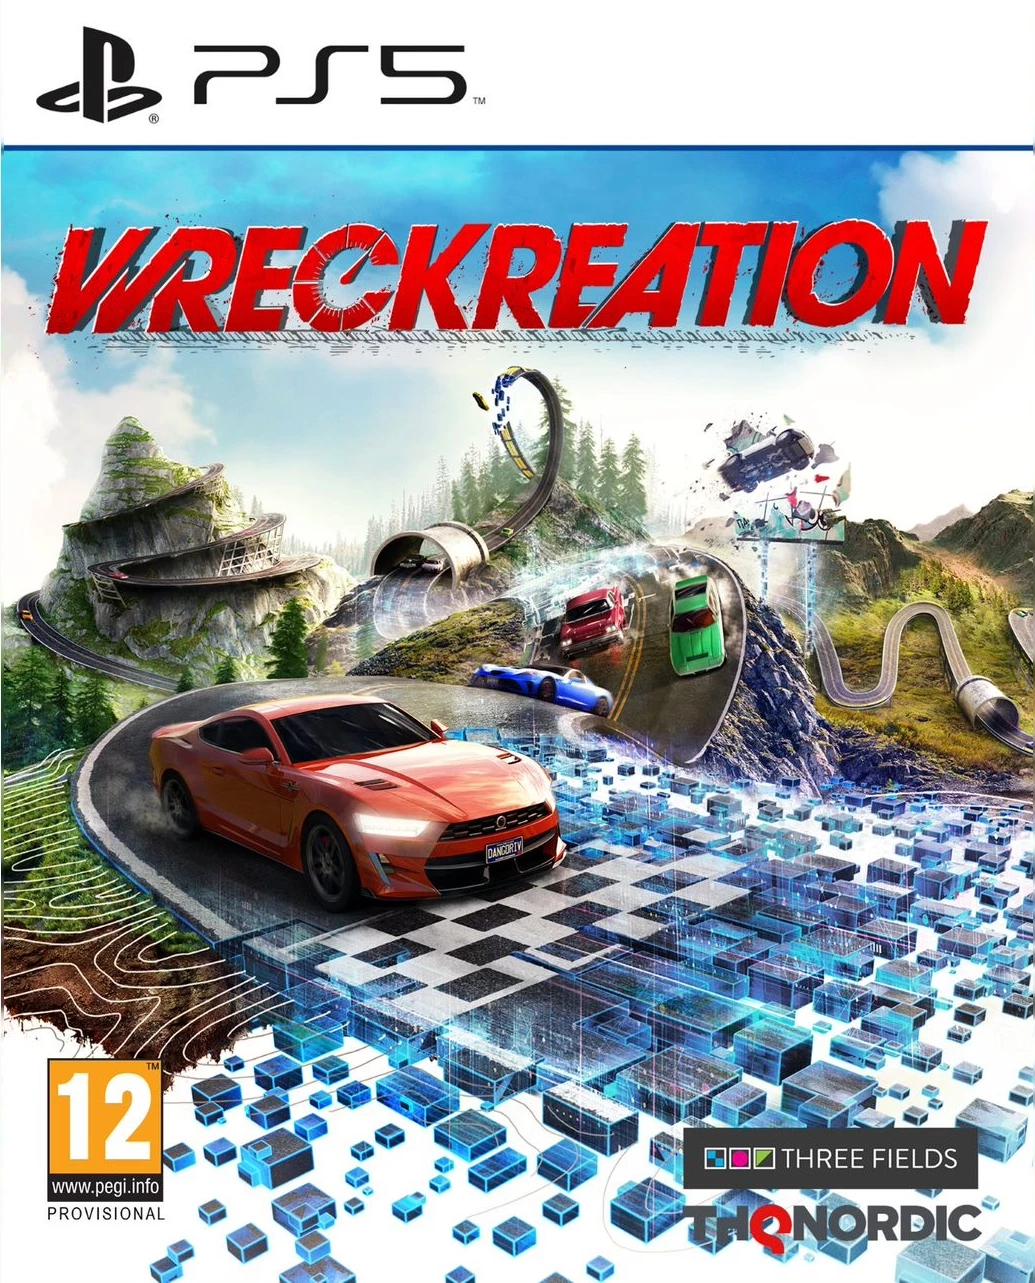 Wreckreation (PS5), Three Fields, THQ Nordic